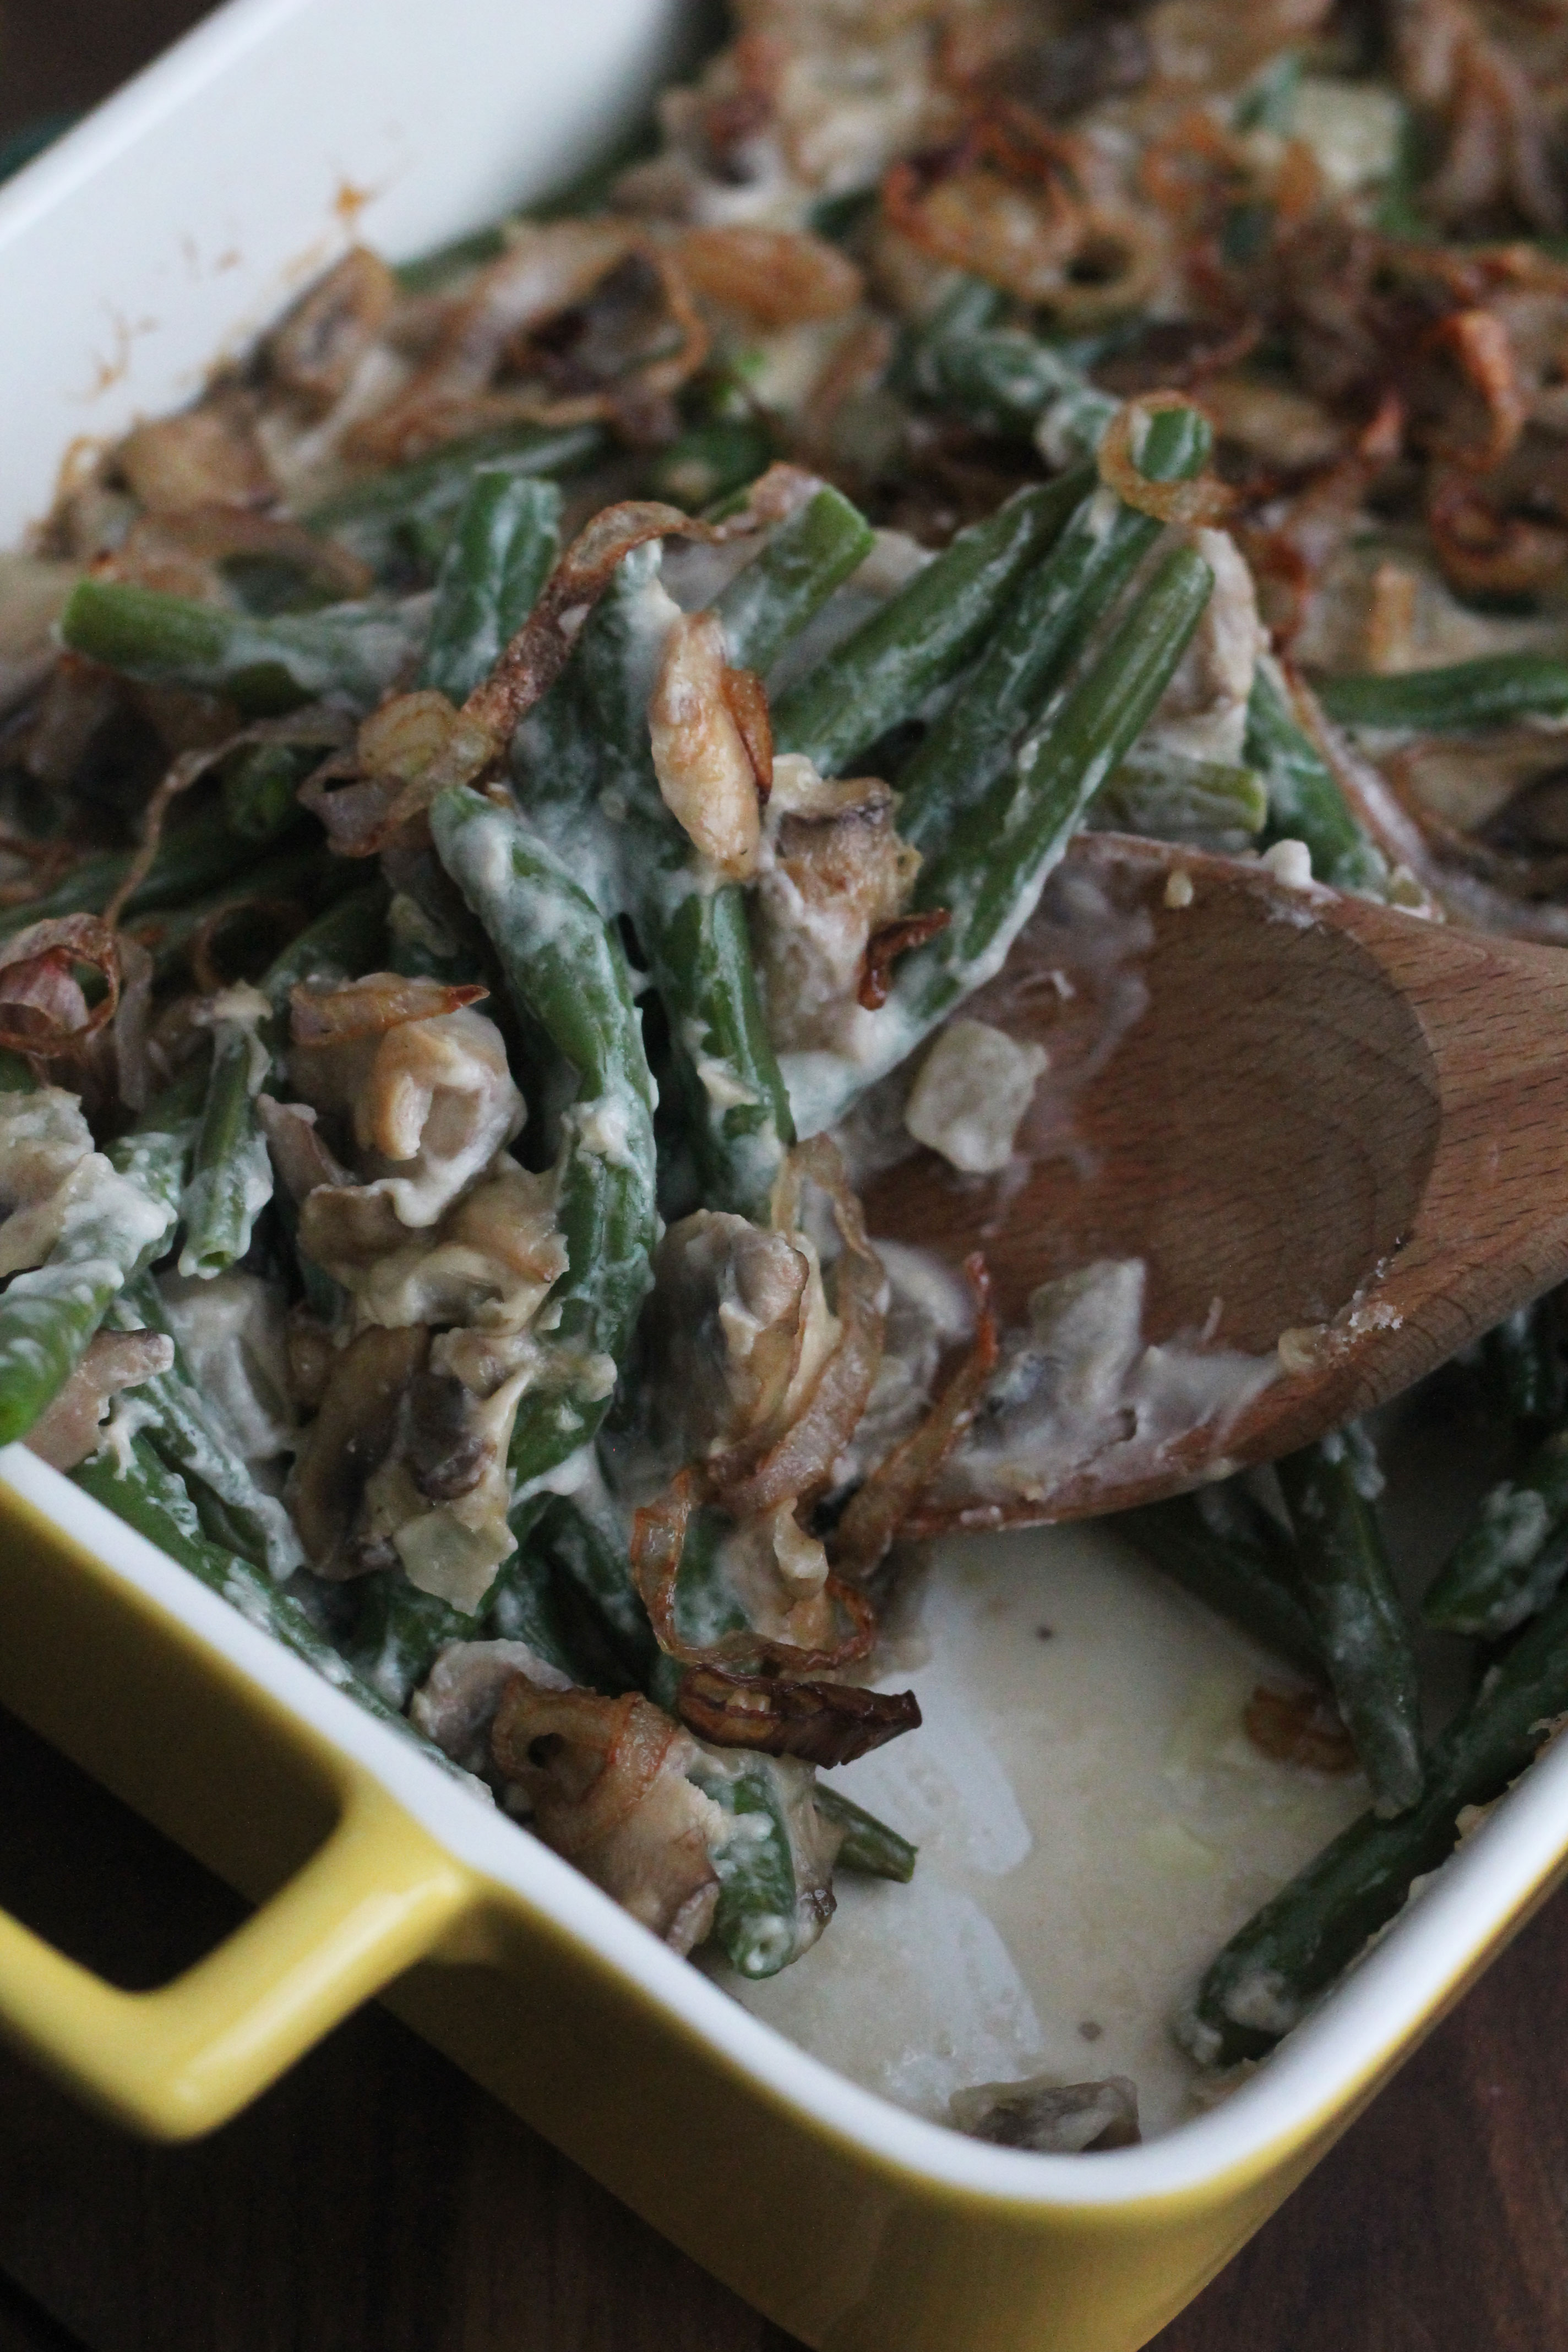 With fresh green beans, homemade creamy mushroom sauce, and fried shallots this dish gives the old Green Bean Casserole a run for its money